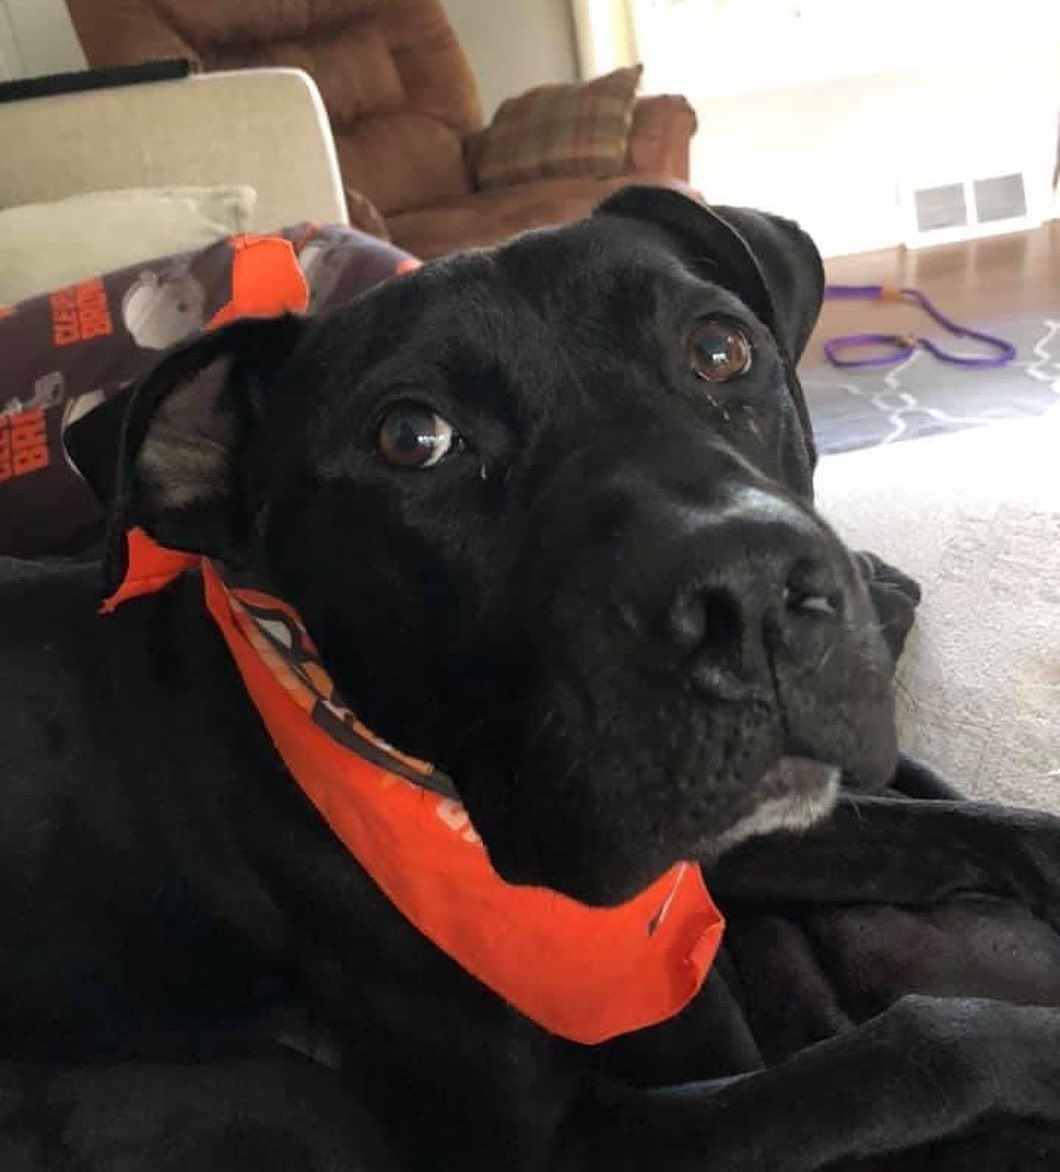 Meet Plunket, aka mister tall, dark and handsome! (He’s actually kind of a low-rider, so maybe we should call him stout, dark & handsome😆)

Plunket has been enjoying an extended sleepover with a volunteer, and being a wonderful houseguest! In between trying on different outfits to cheer on the Browns, Plunket has enjoyed catching up on naps and snuggling with his hosts. While he can be more anxious at the kennel, in a home environment, he revealed that he is actually a more chill boy with a pretty moderate energy level. 

Plunket only had one accident and seems like he picks up quickly on a routine,l. He has done quite well in his crate. And for activity, Plunket is a bit of a treat hound and seems to enjoy a good game of 